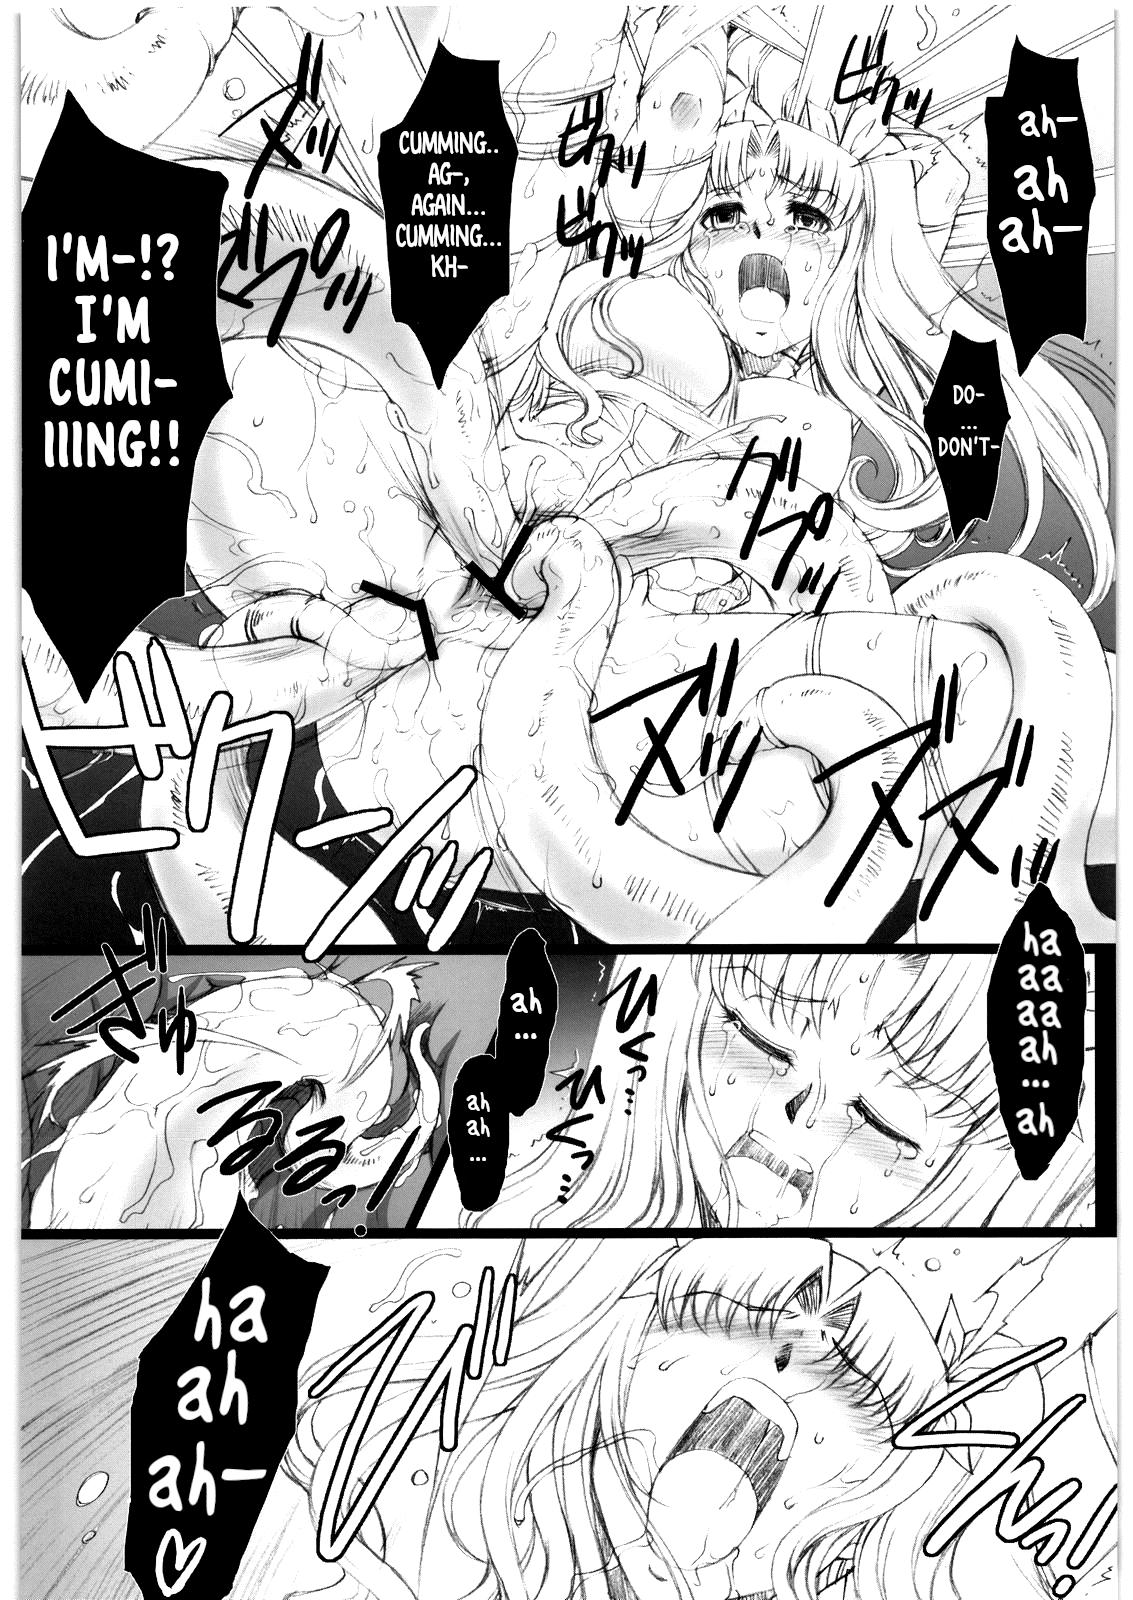 Passionate Red Degeneration - Fate stay night Barely 18 Porn - Page 5